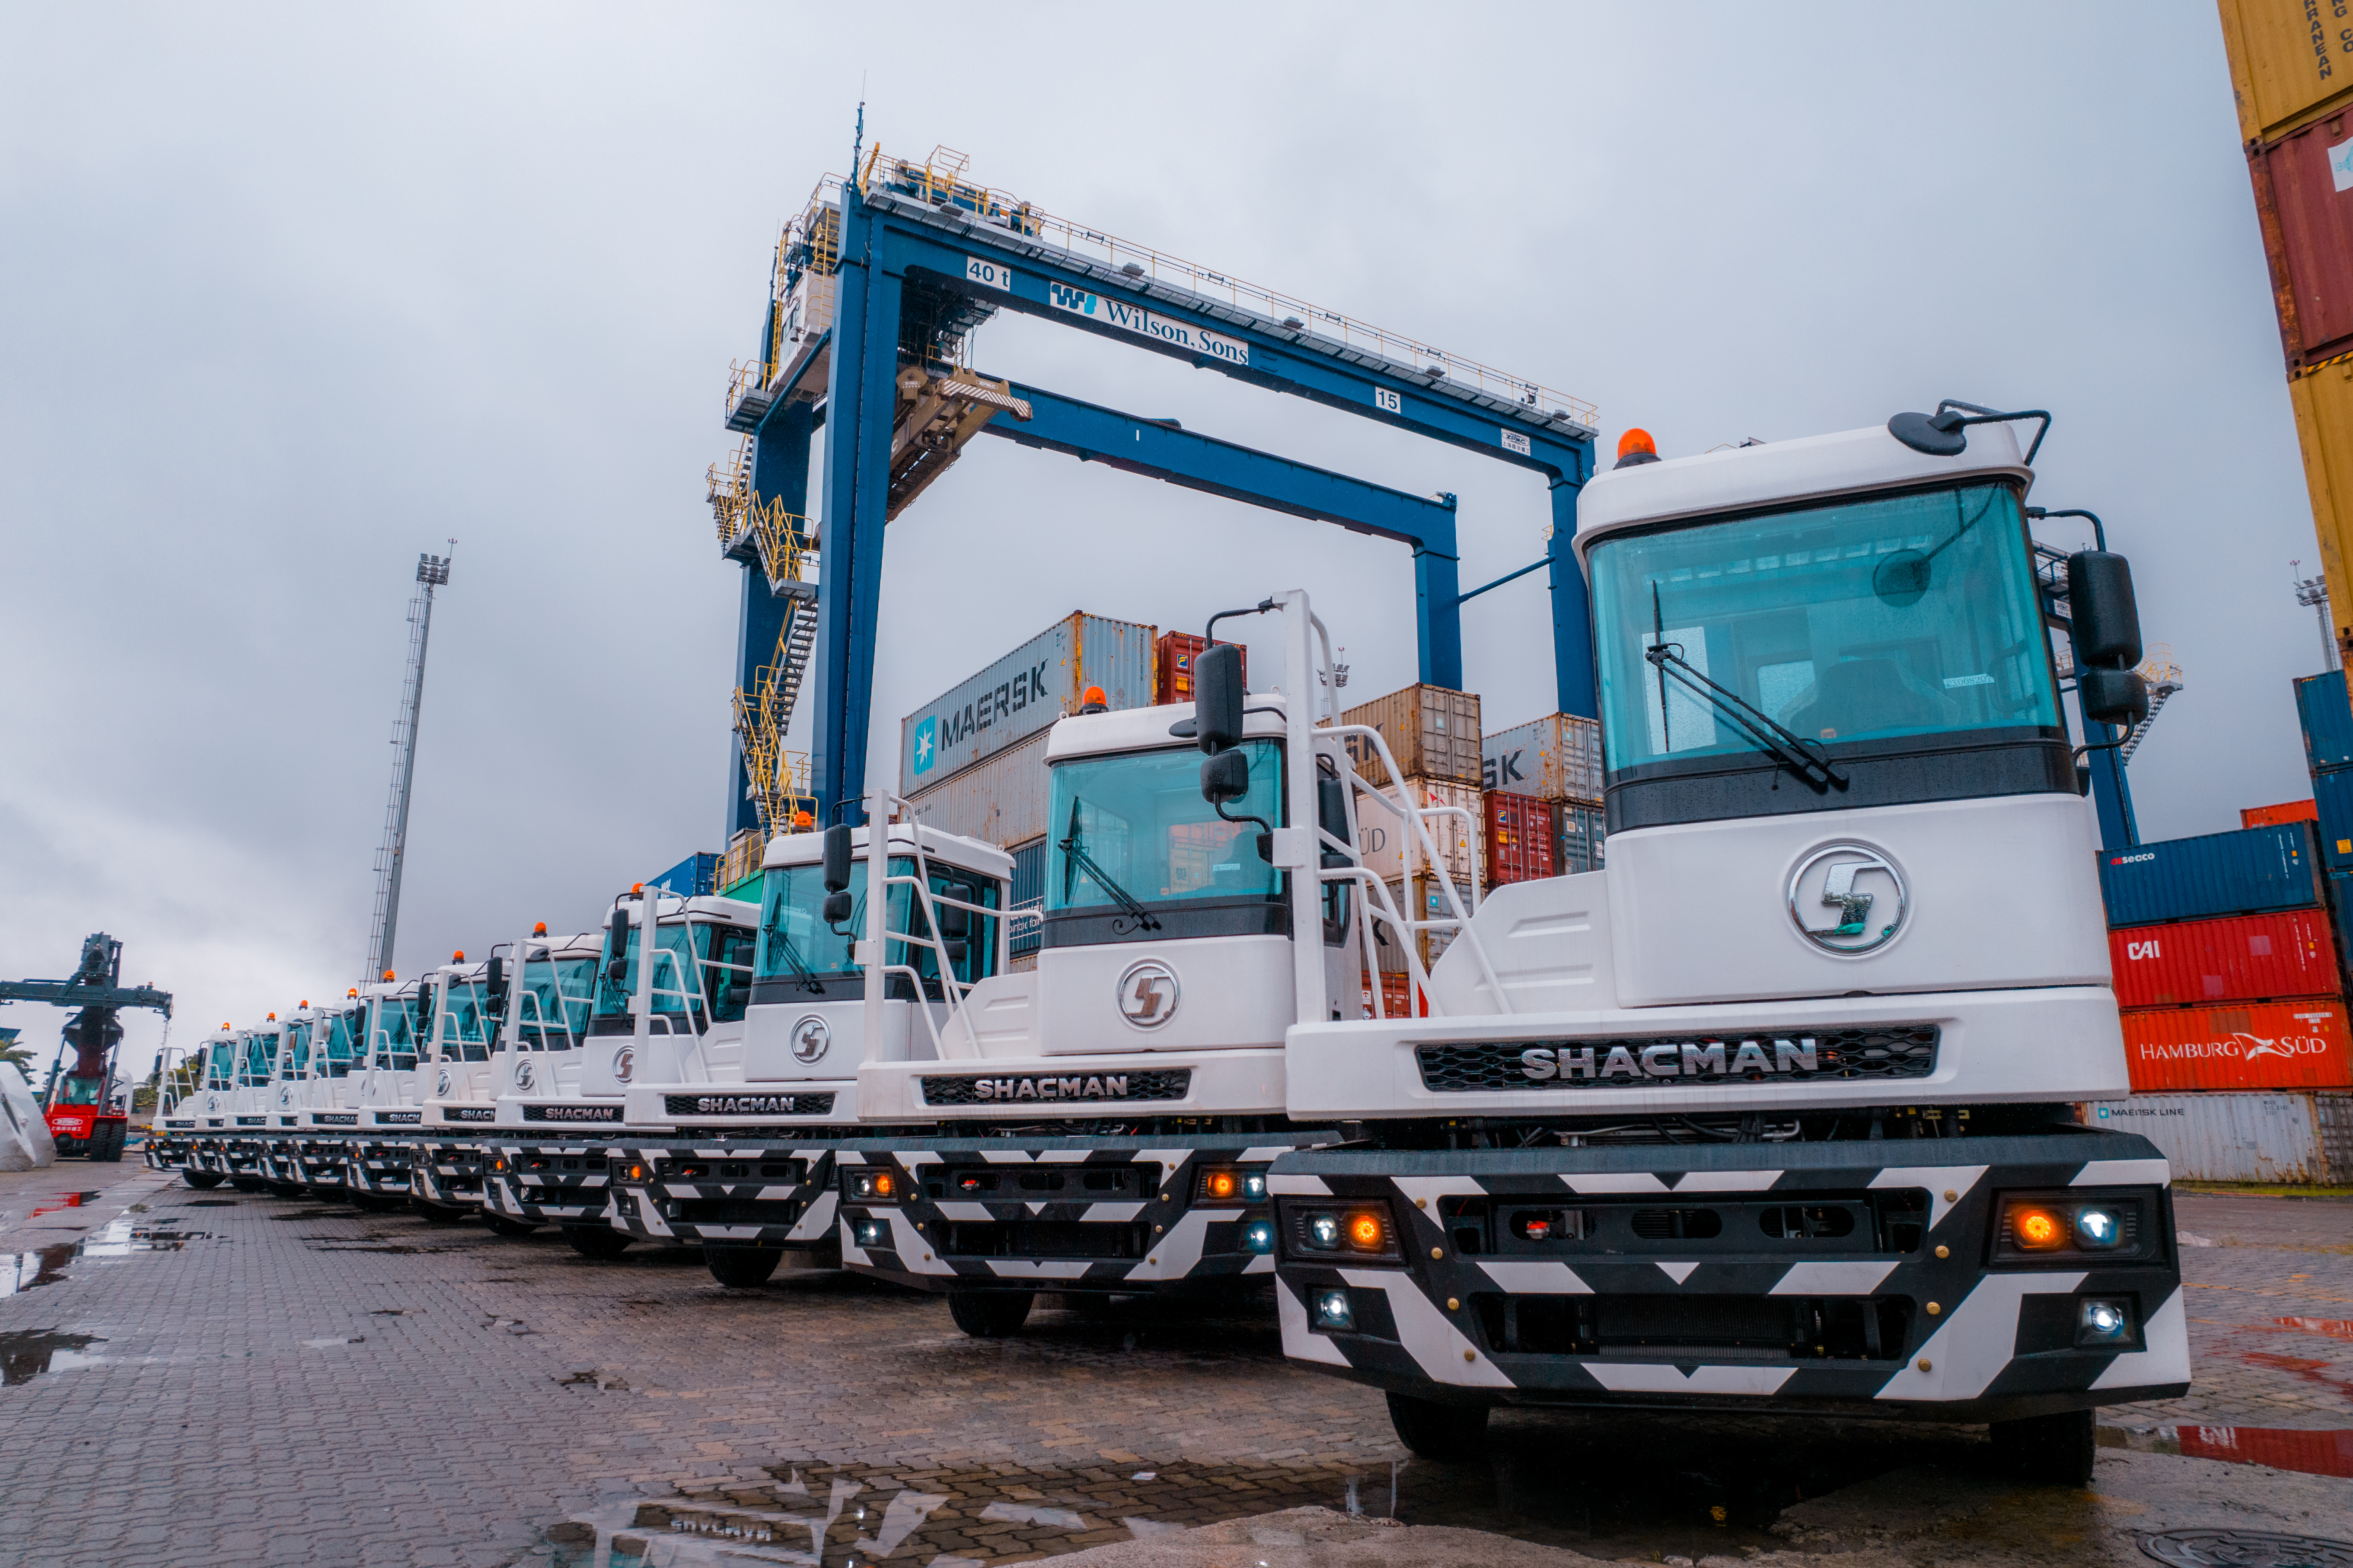 Wilson Sons expands its fleet to operate, at Tecon Salvador, in the port of the capital of Bahia